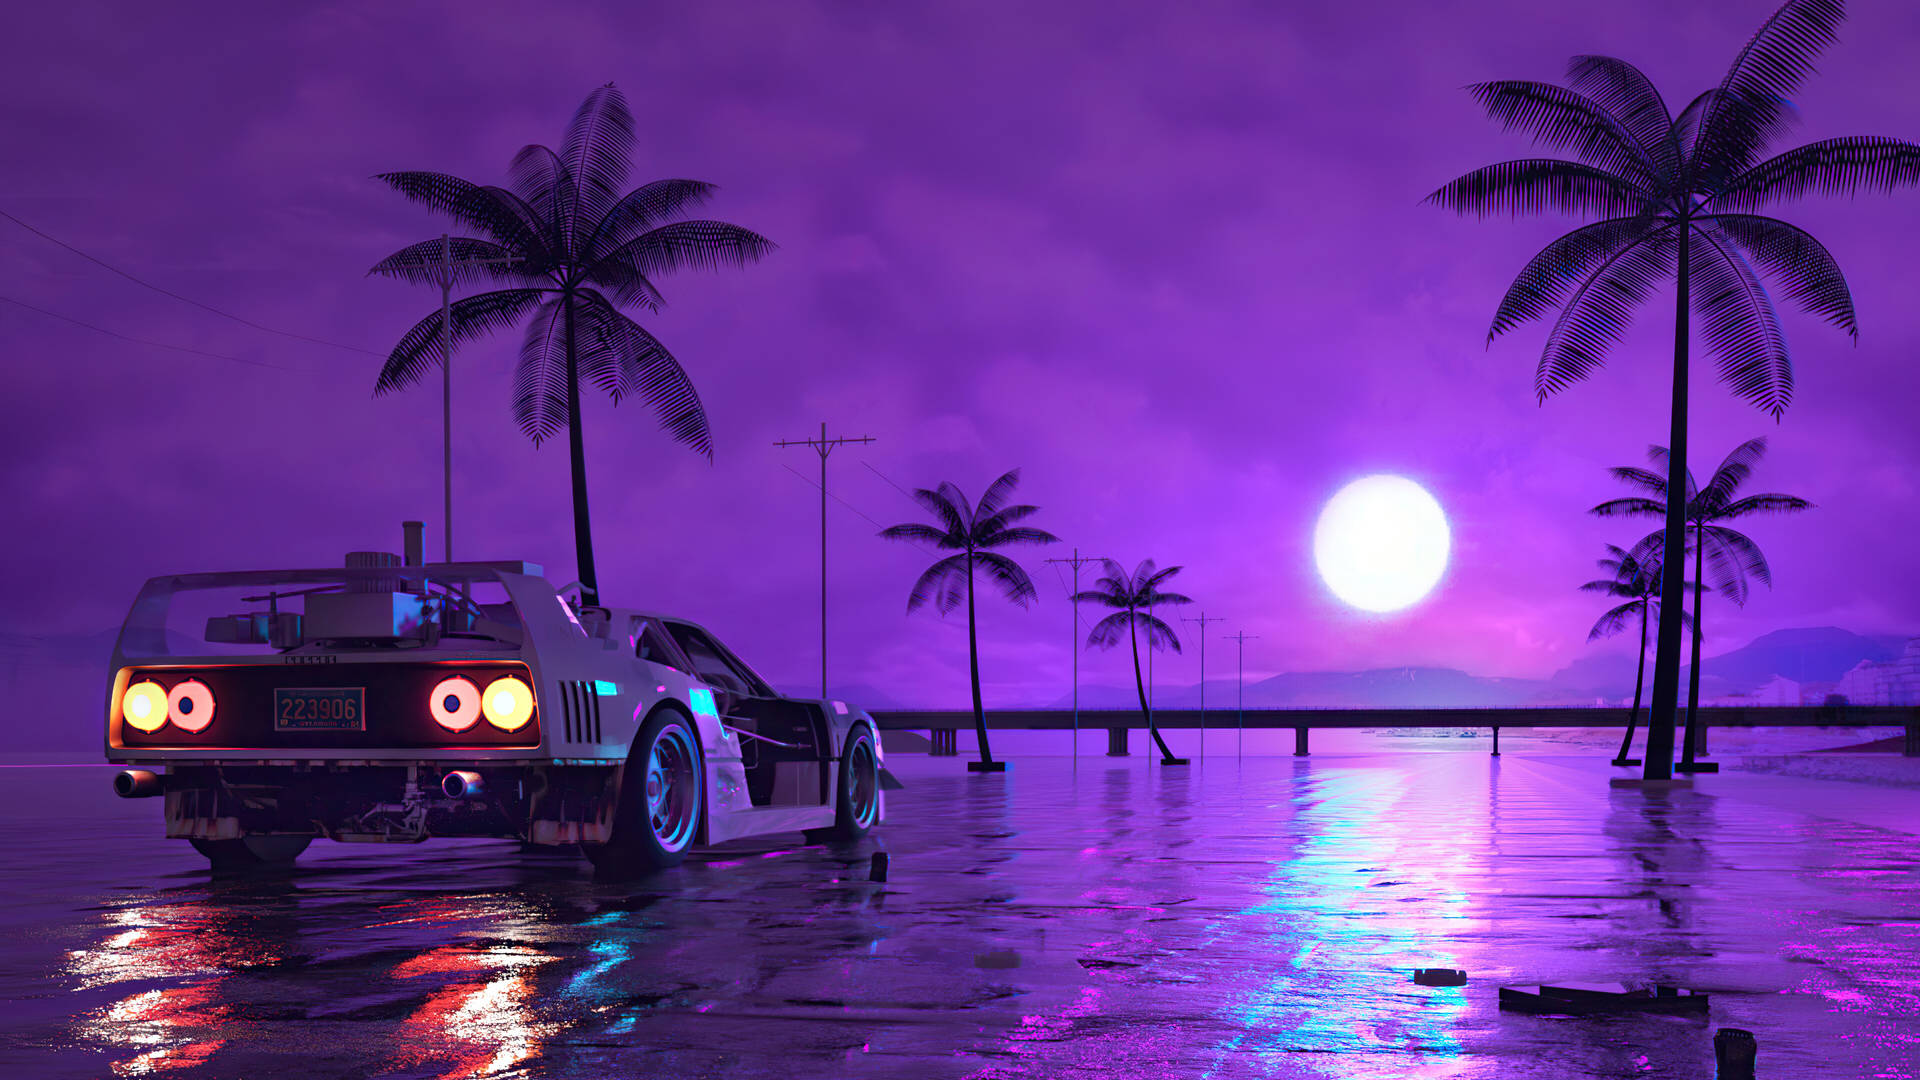 Retro Aesthetic 3840X2160 Wallpaper and Background Image